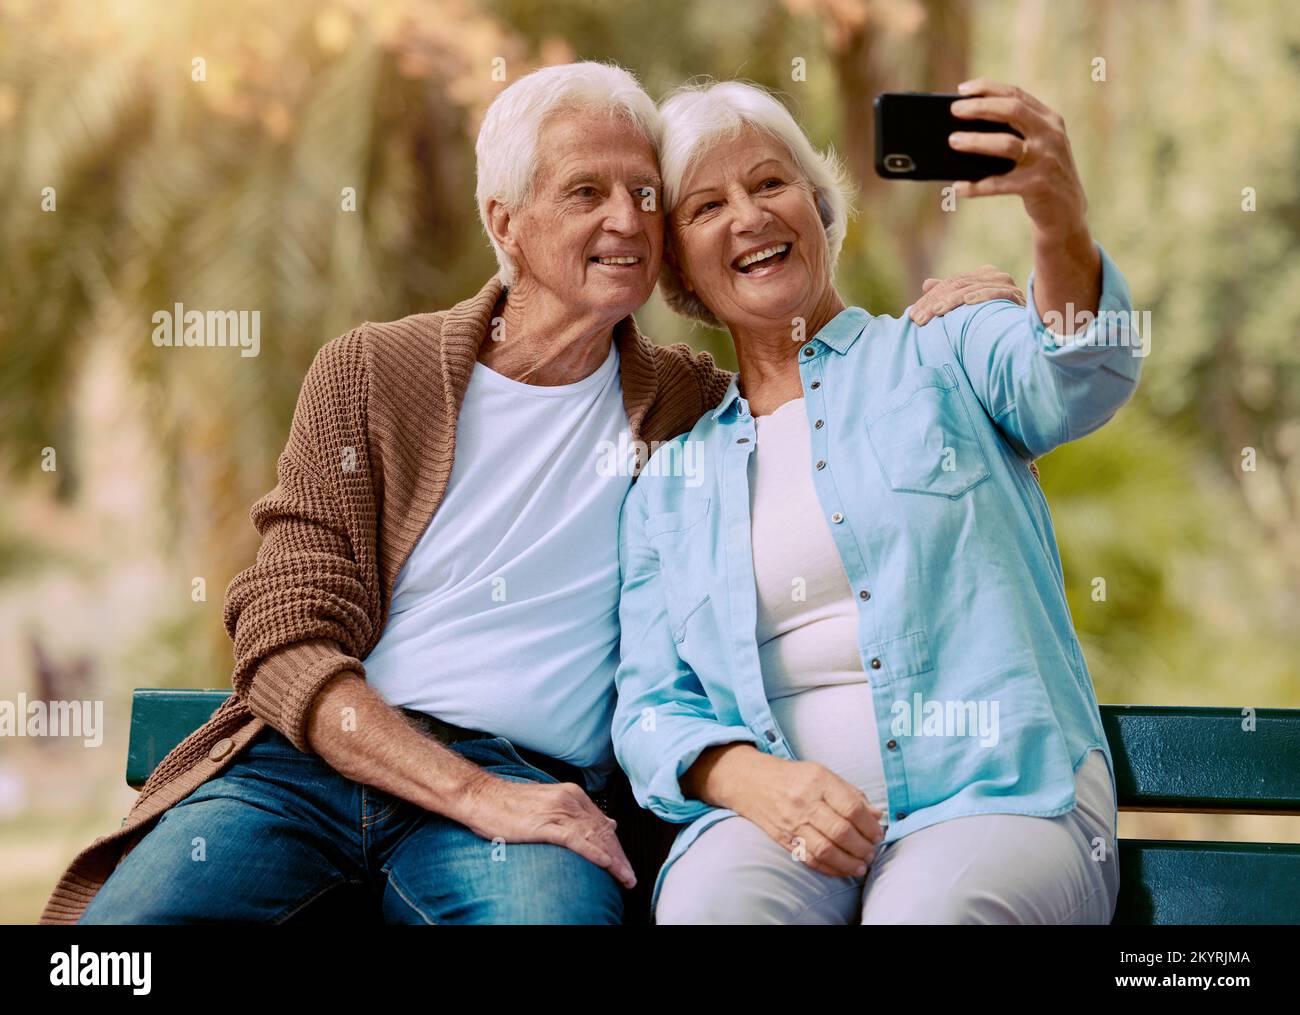 Senior couple, phone selfie and smile on park bench for love, care and social media profile picture of a happy retirement. Old man and woman outdoor Stock Photo